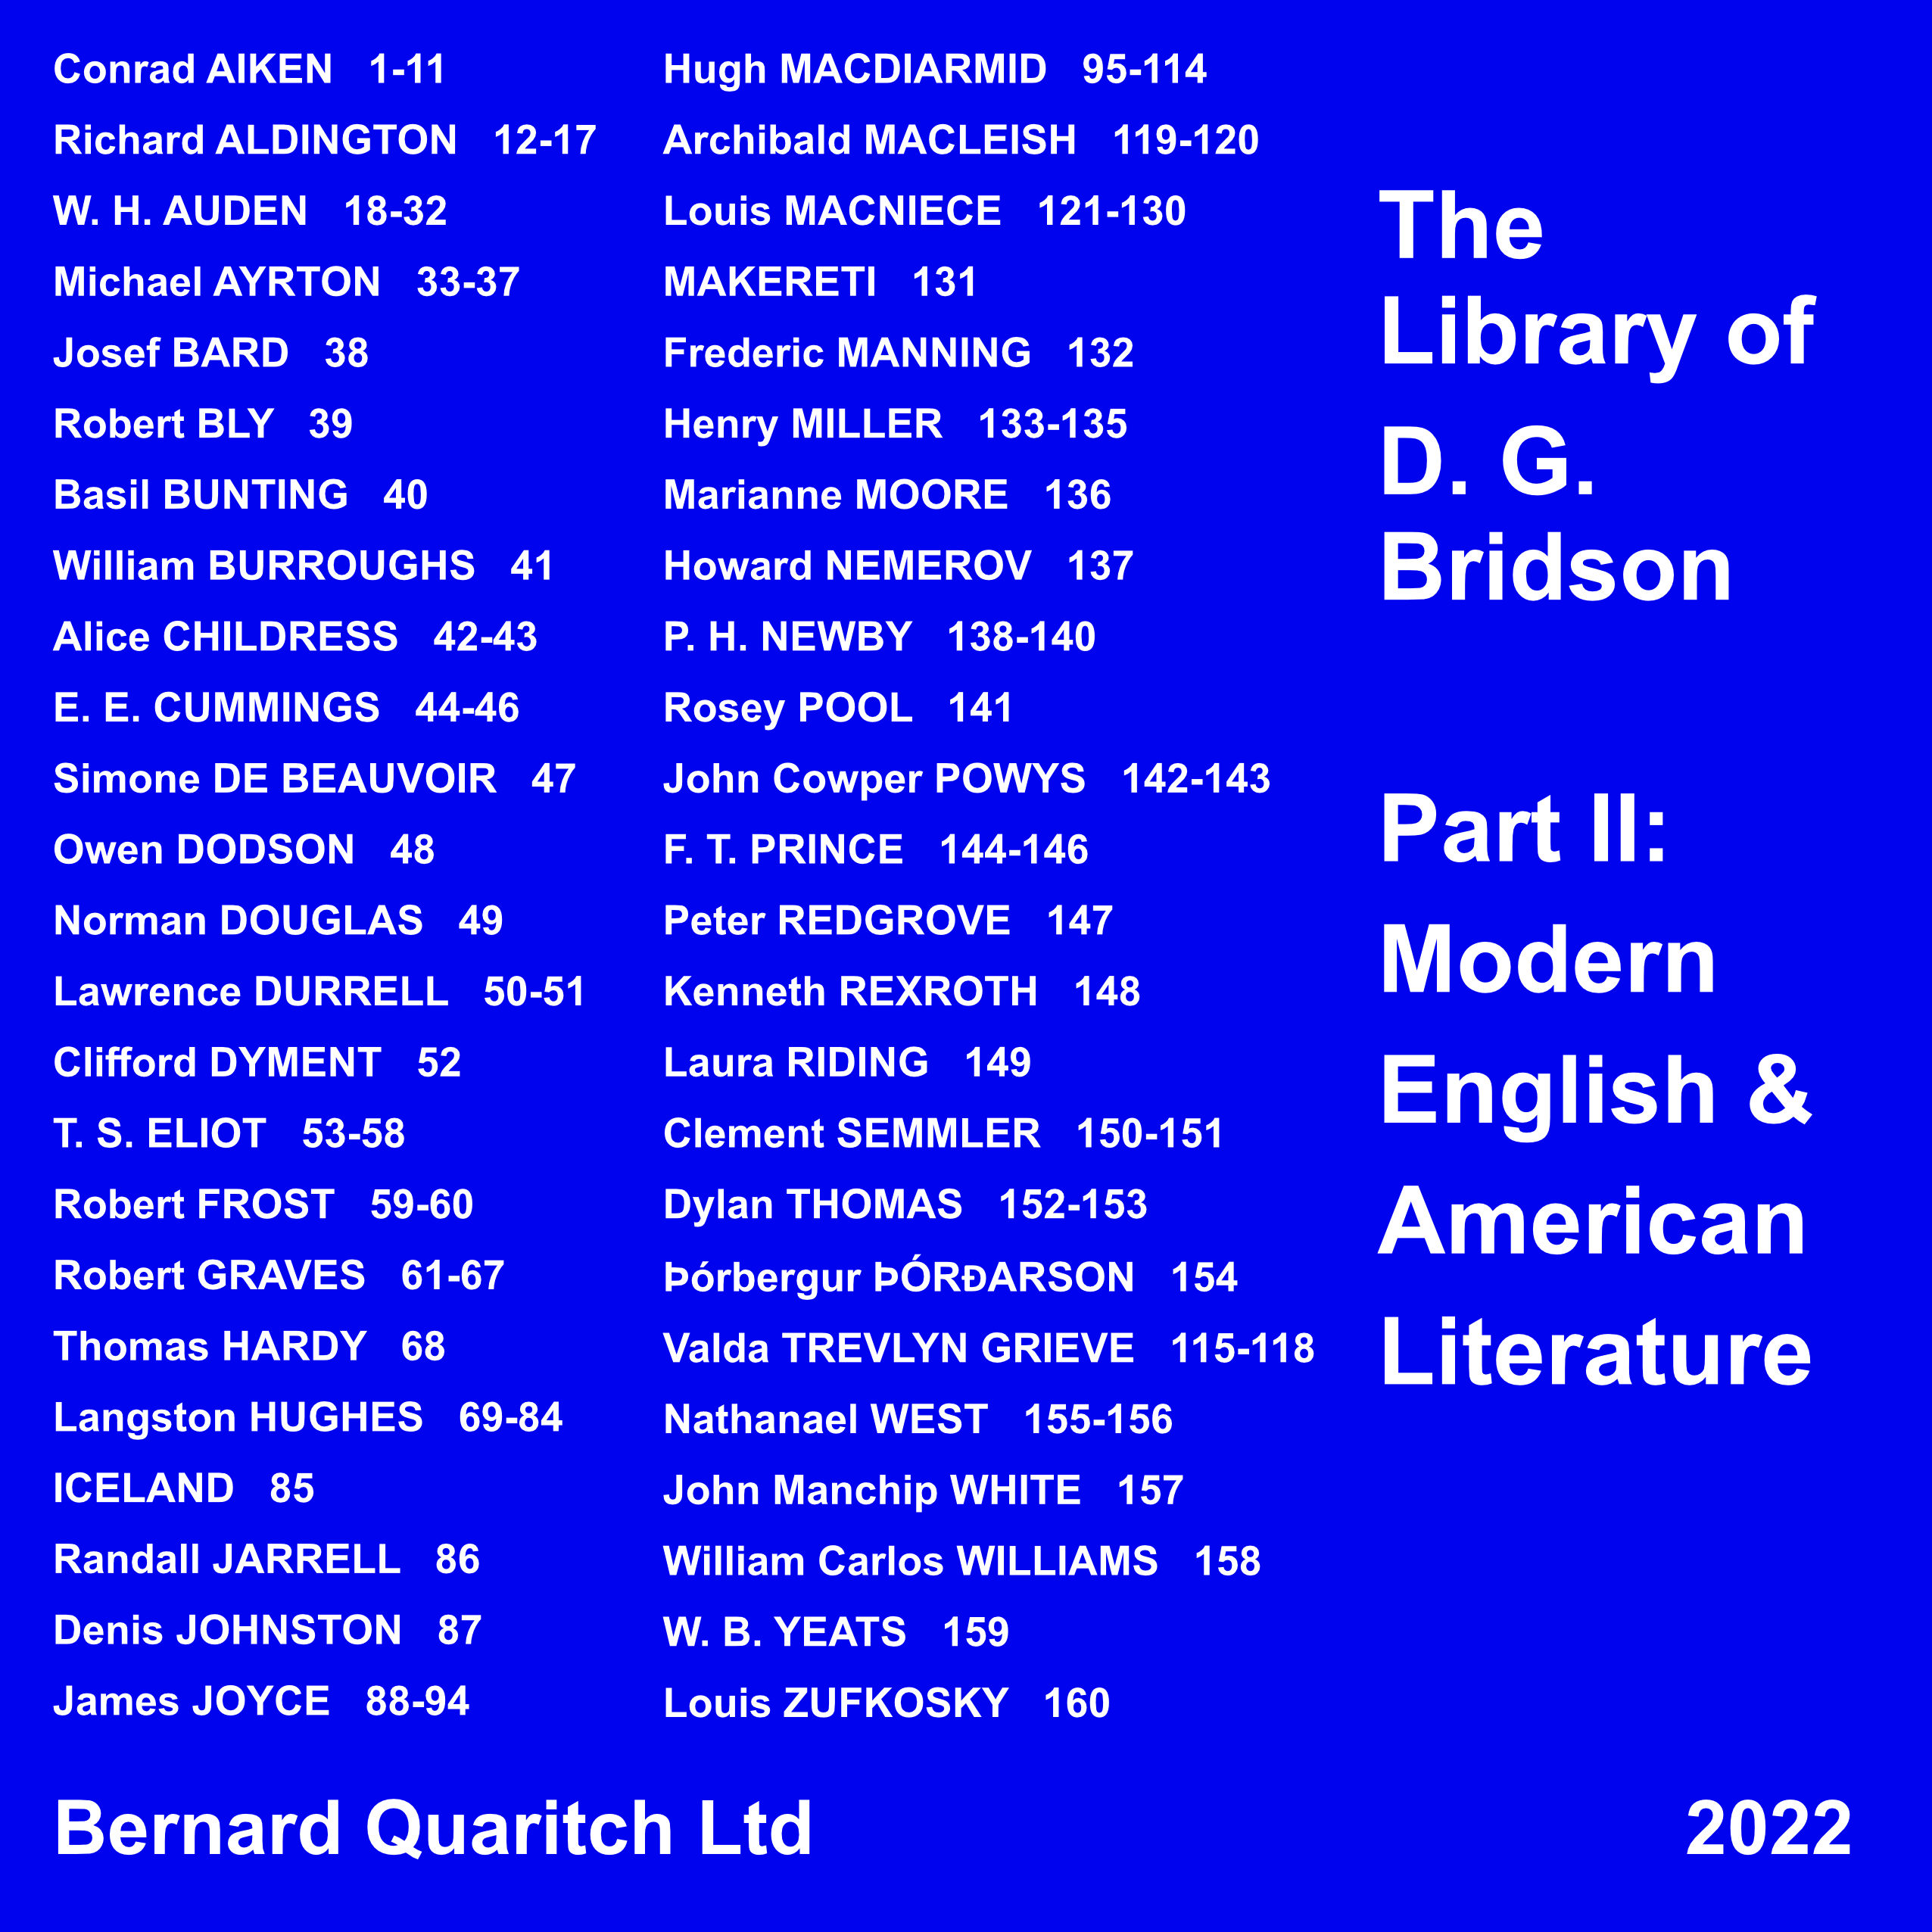 The Library of D. G. Bridson Part II: Modern English and American Literature